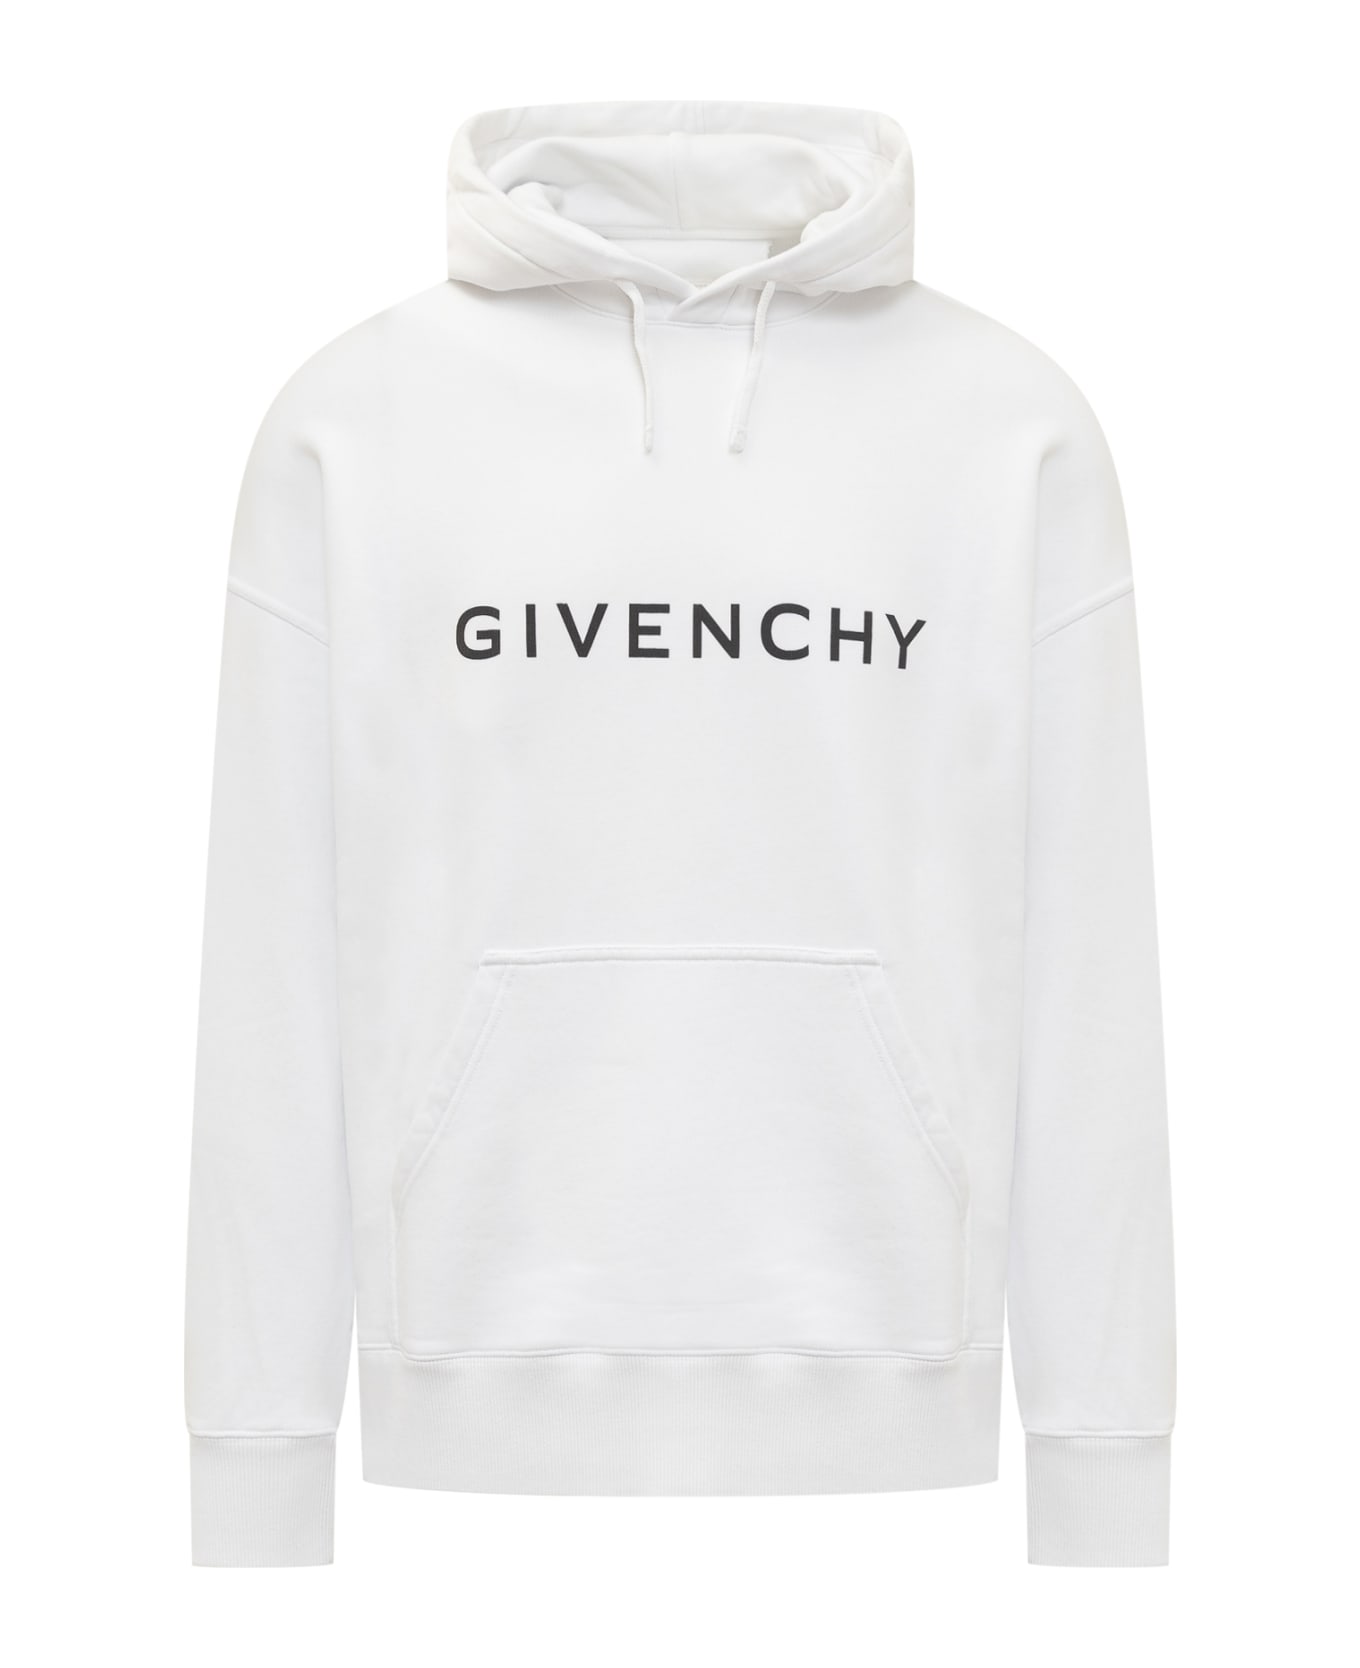 Givenchy Archetype Hoodie - White フリース